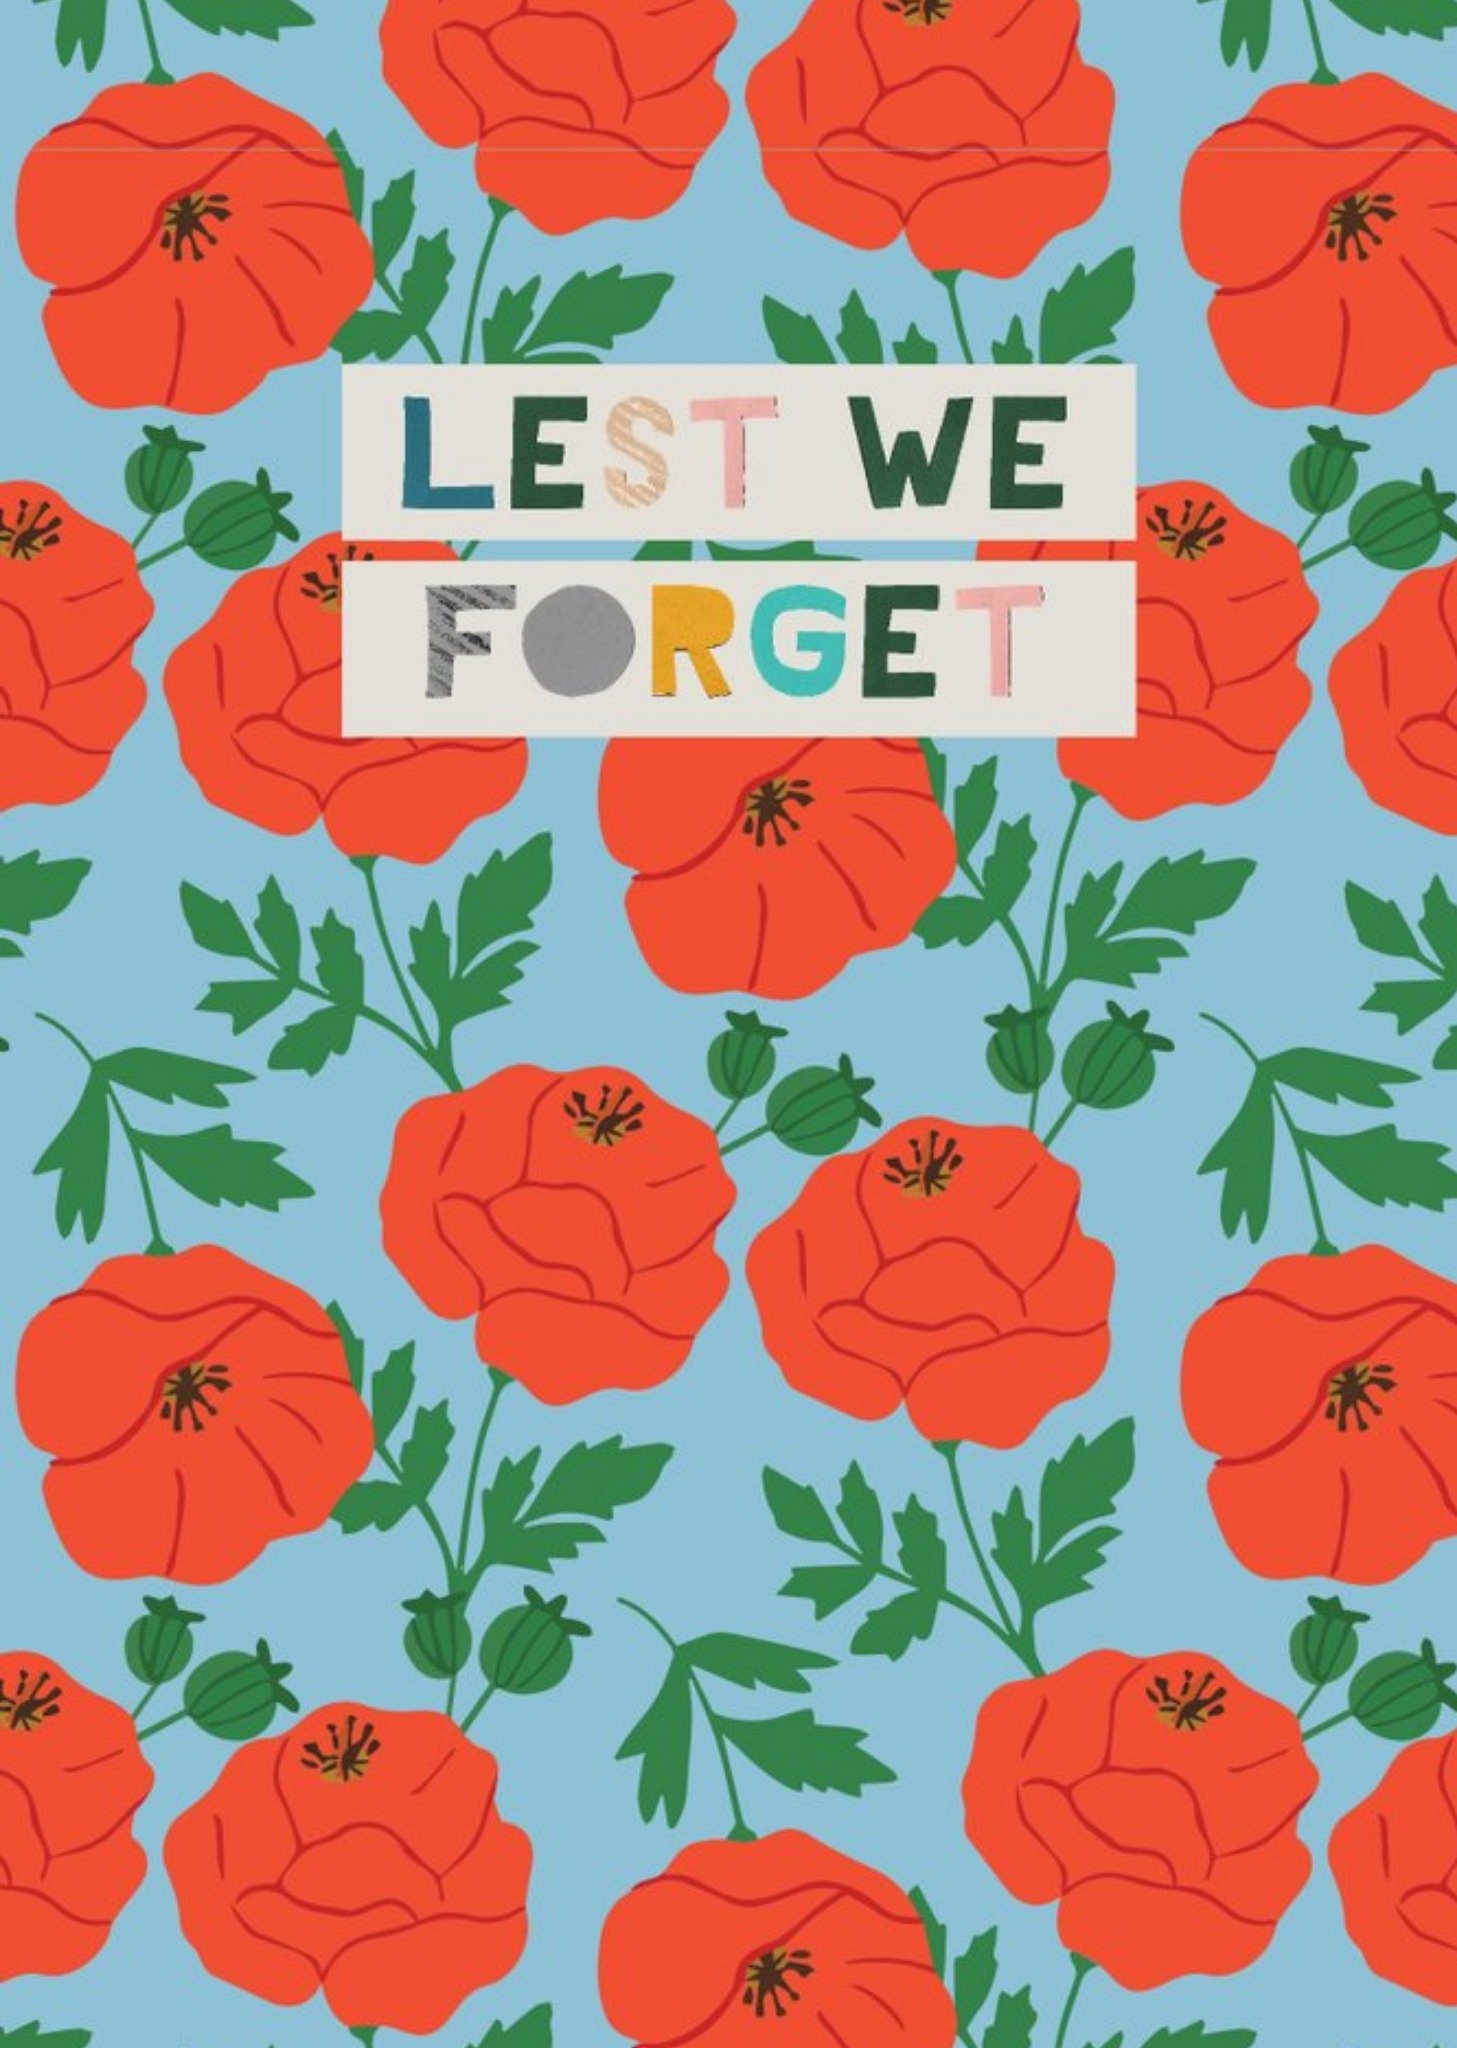 Moonpig Bright Colourful Red Poppies Illustration Lest We Forget Card Ecard